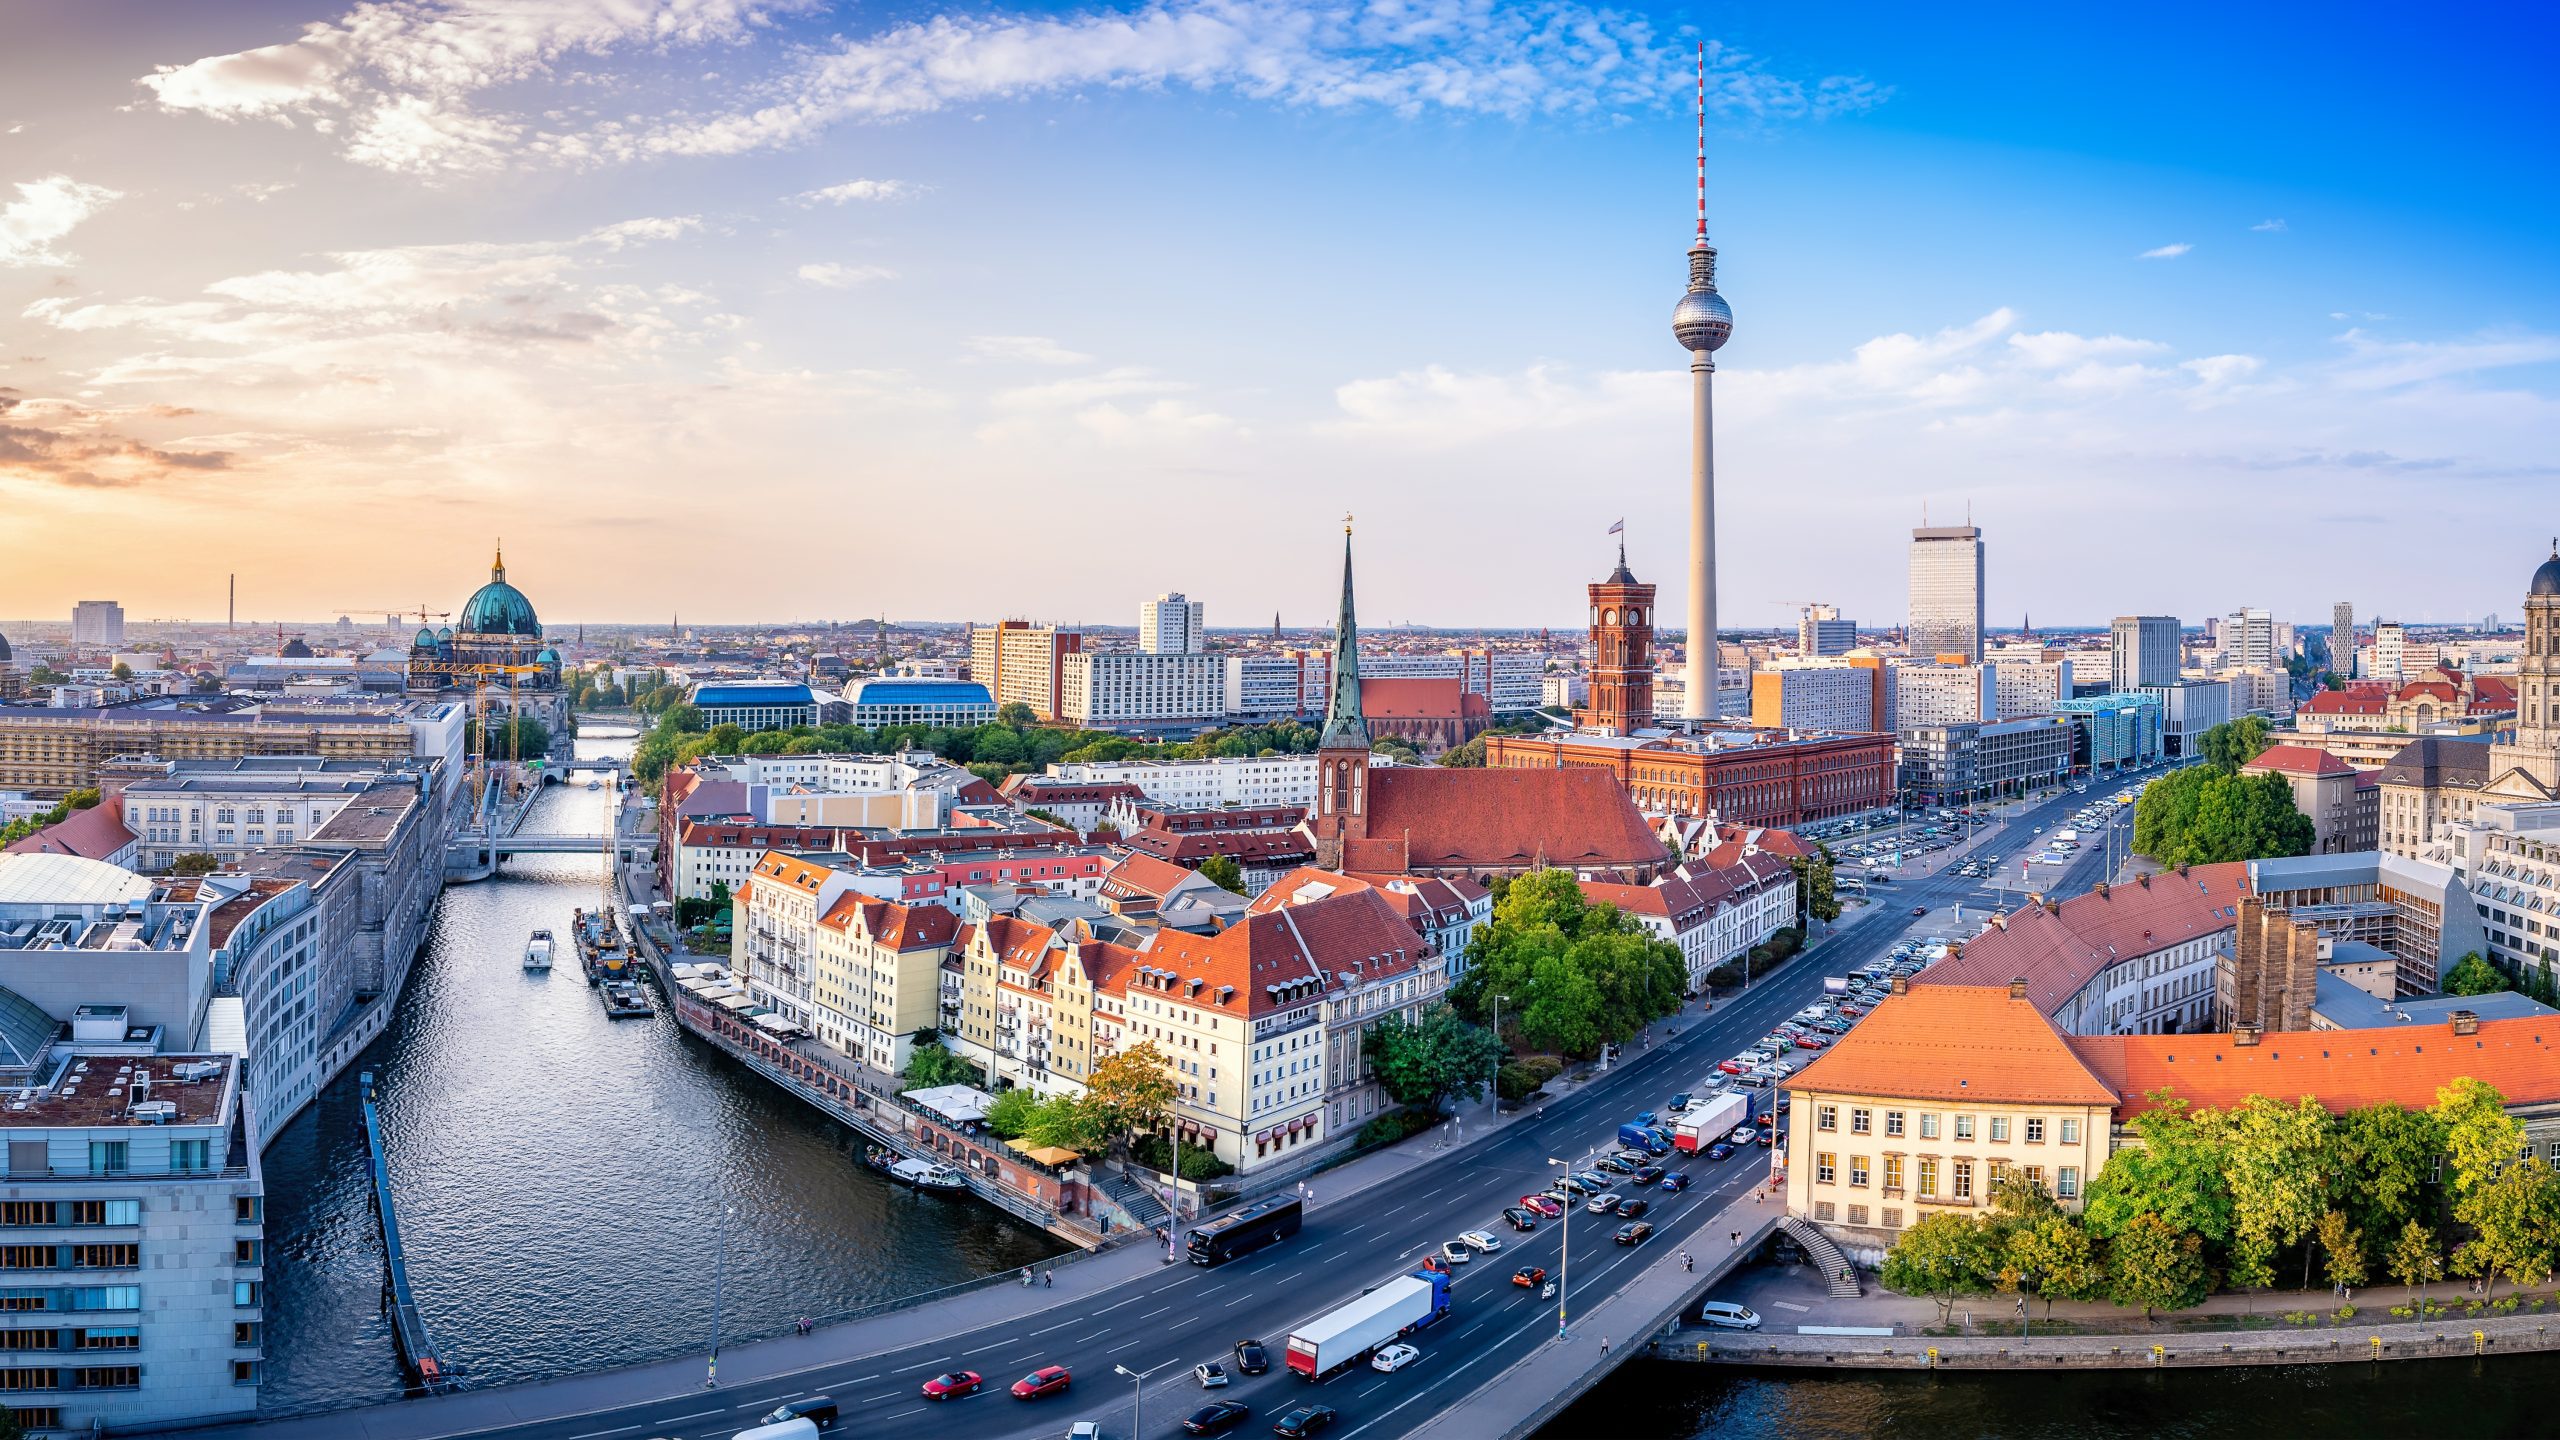 First things on list of 10 best things to do in Germany - Explore the capital Berlin